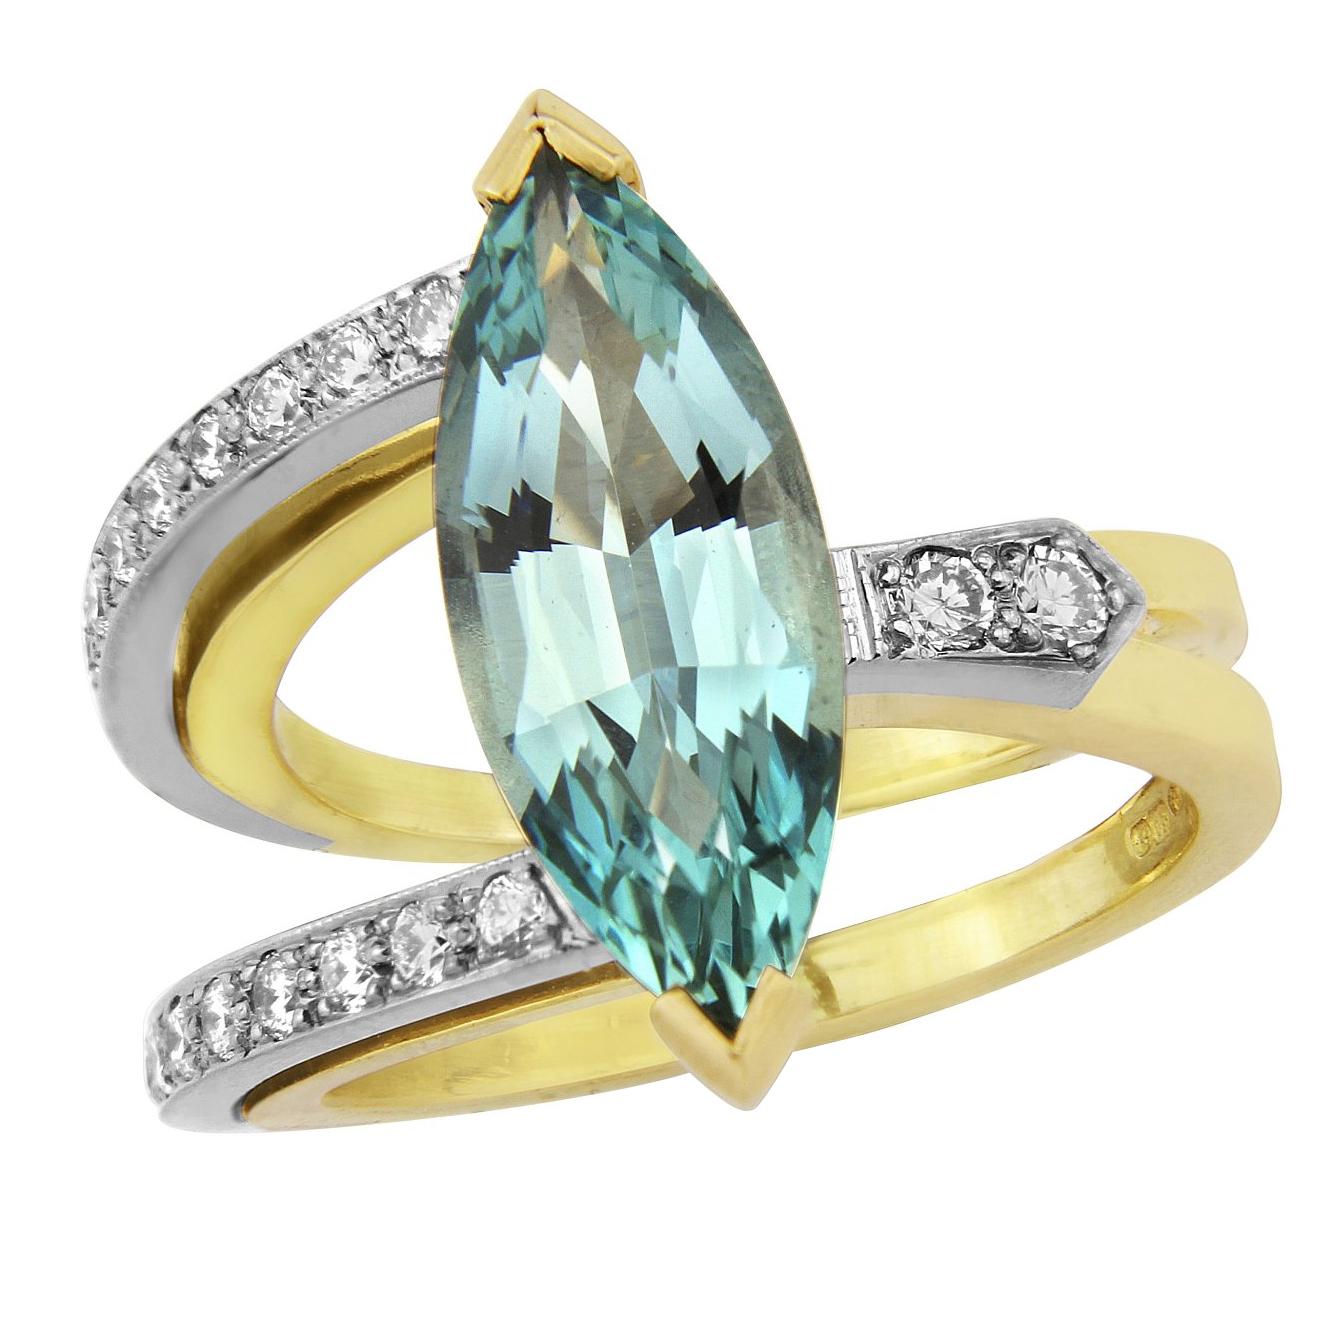 Aquamarine and Diamond Ring in 18 Carat Yellow and 18 Carat White Gold For Sale